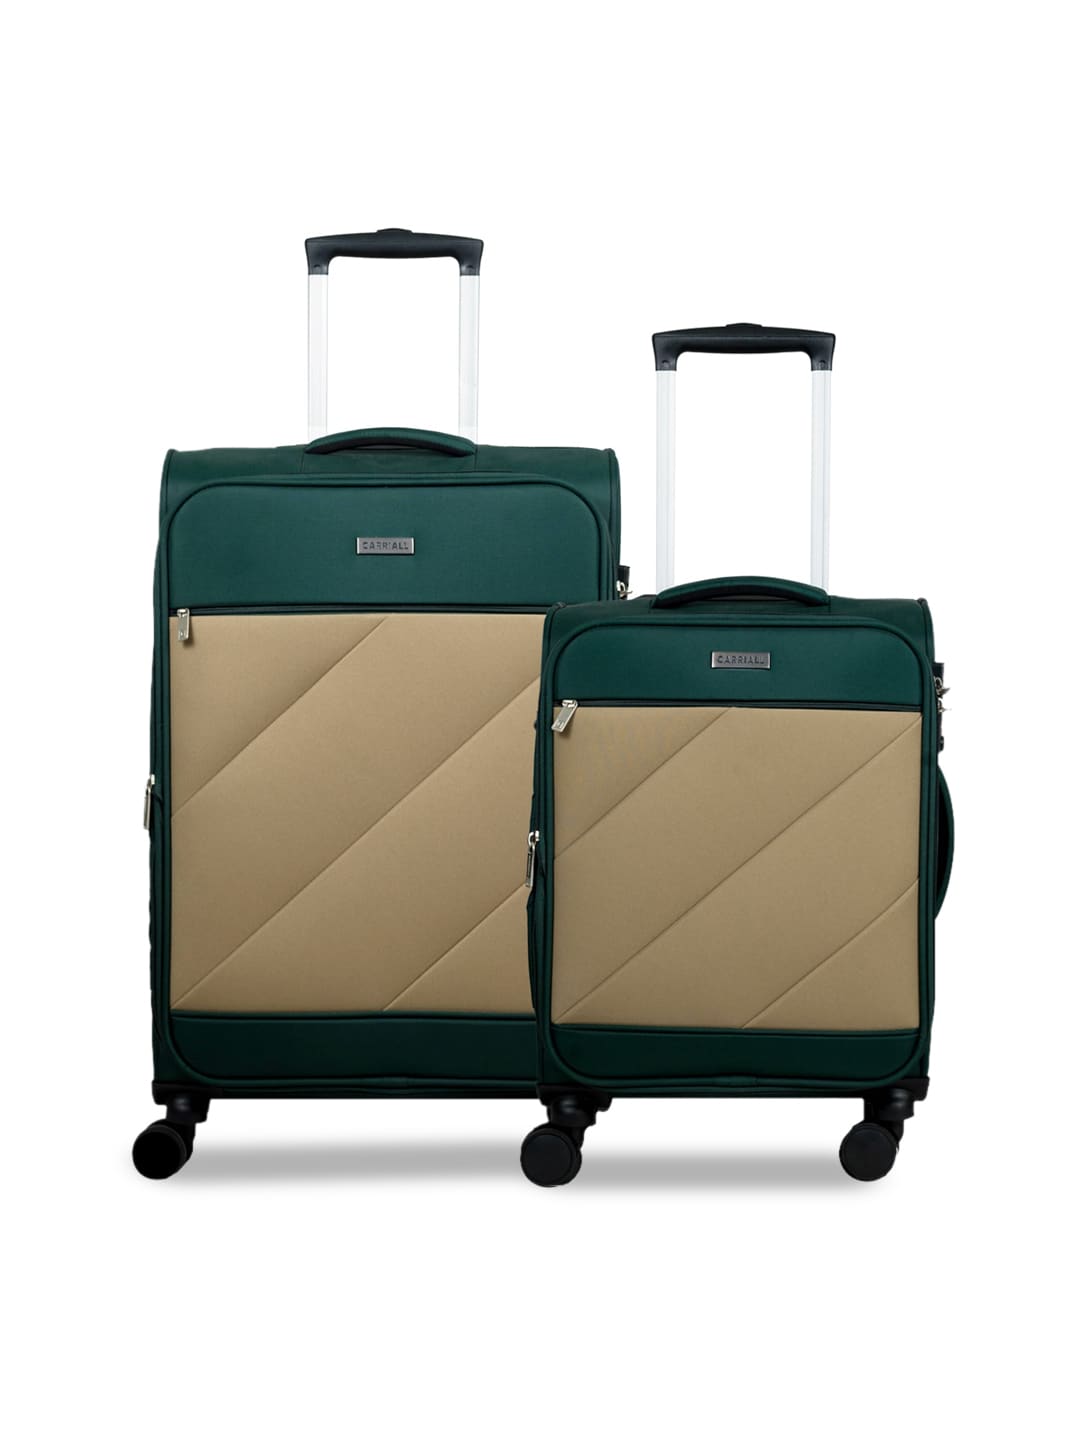 CARRIALL Set Of 2 Green & Beige Colourblocked Soft-Sided Trolley Suitcases Price in India